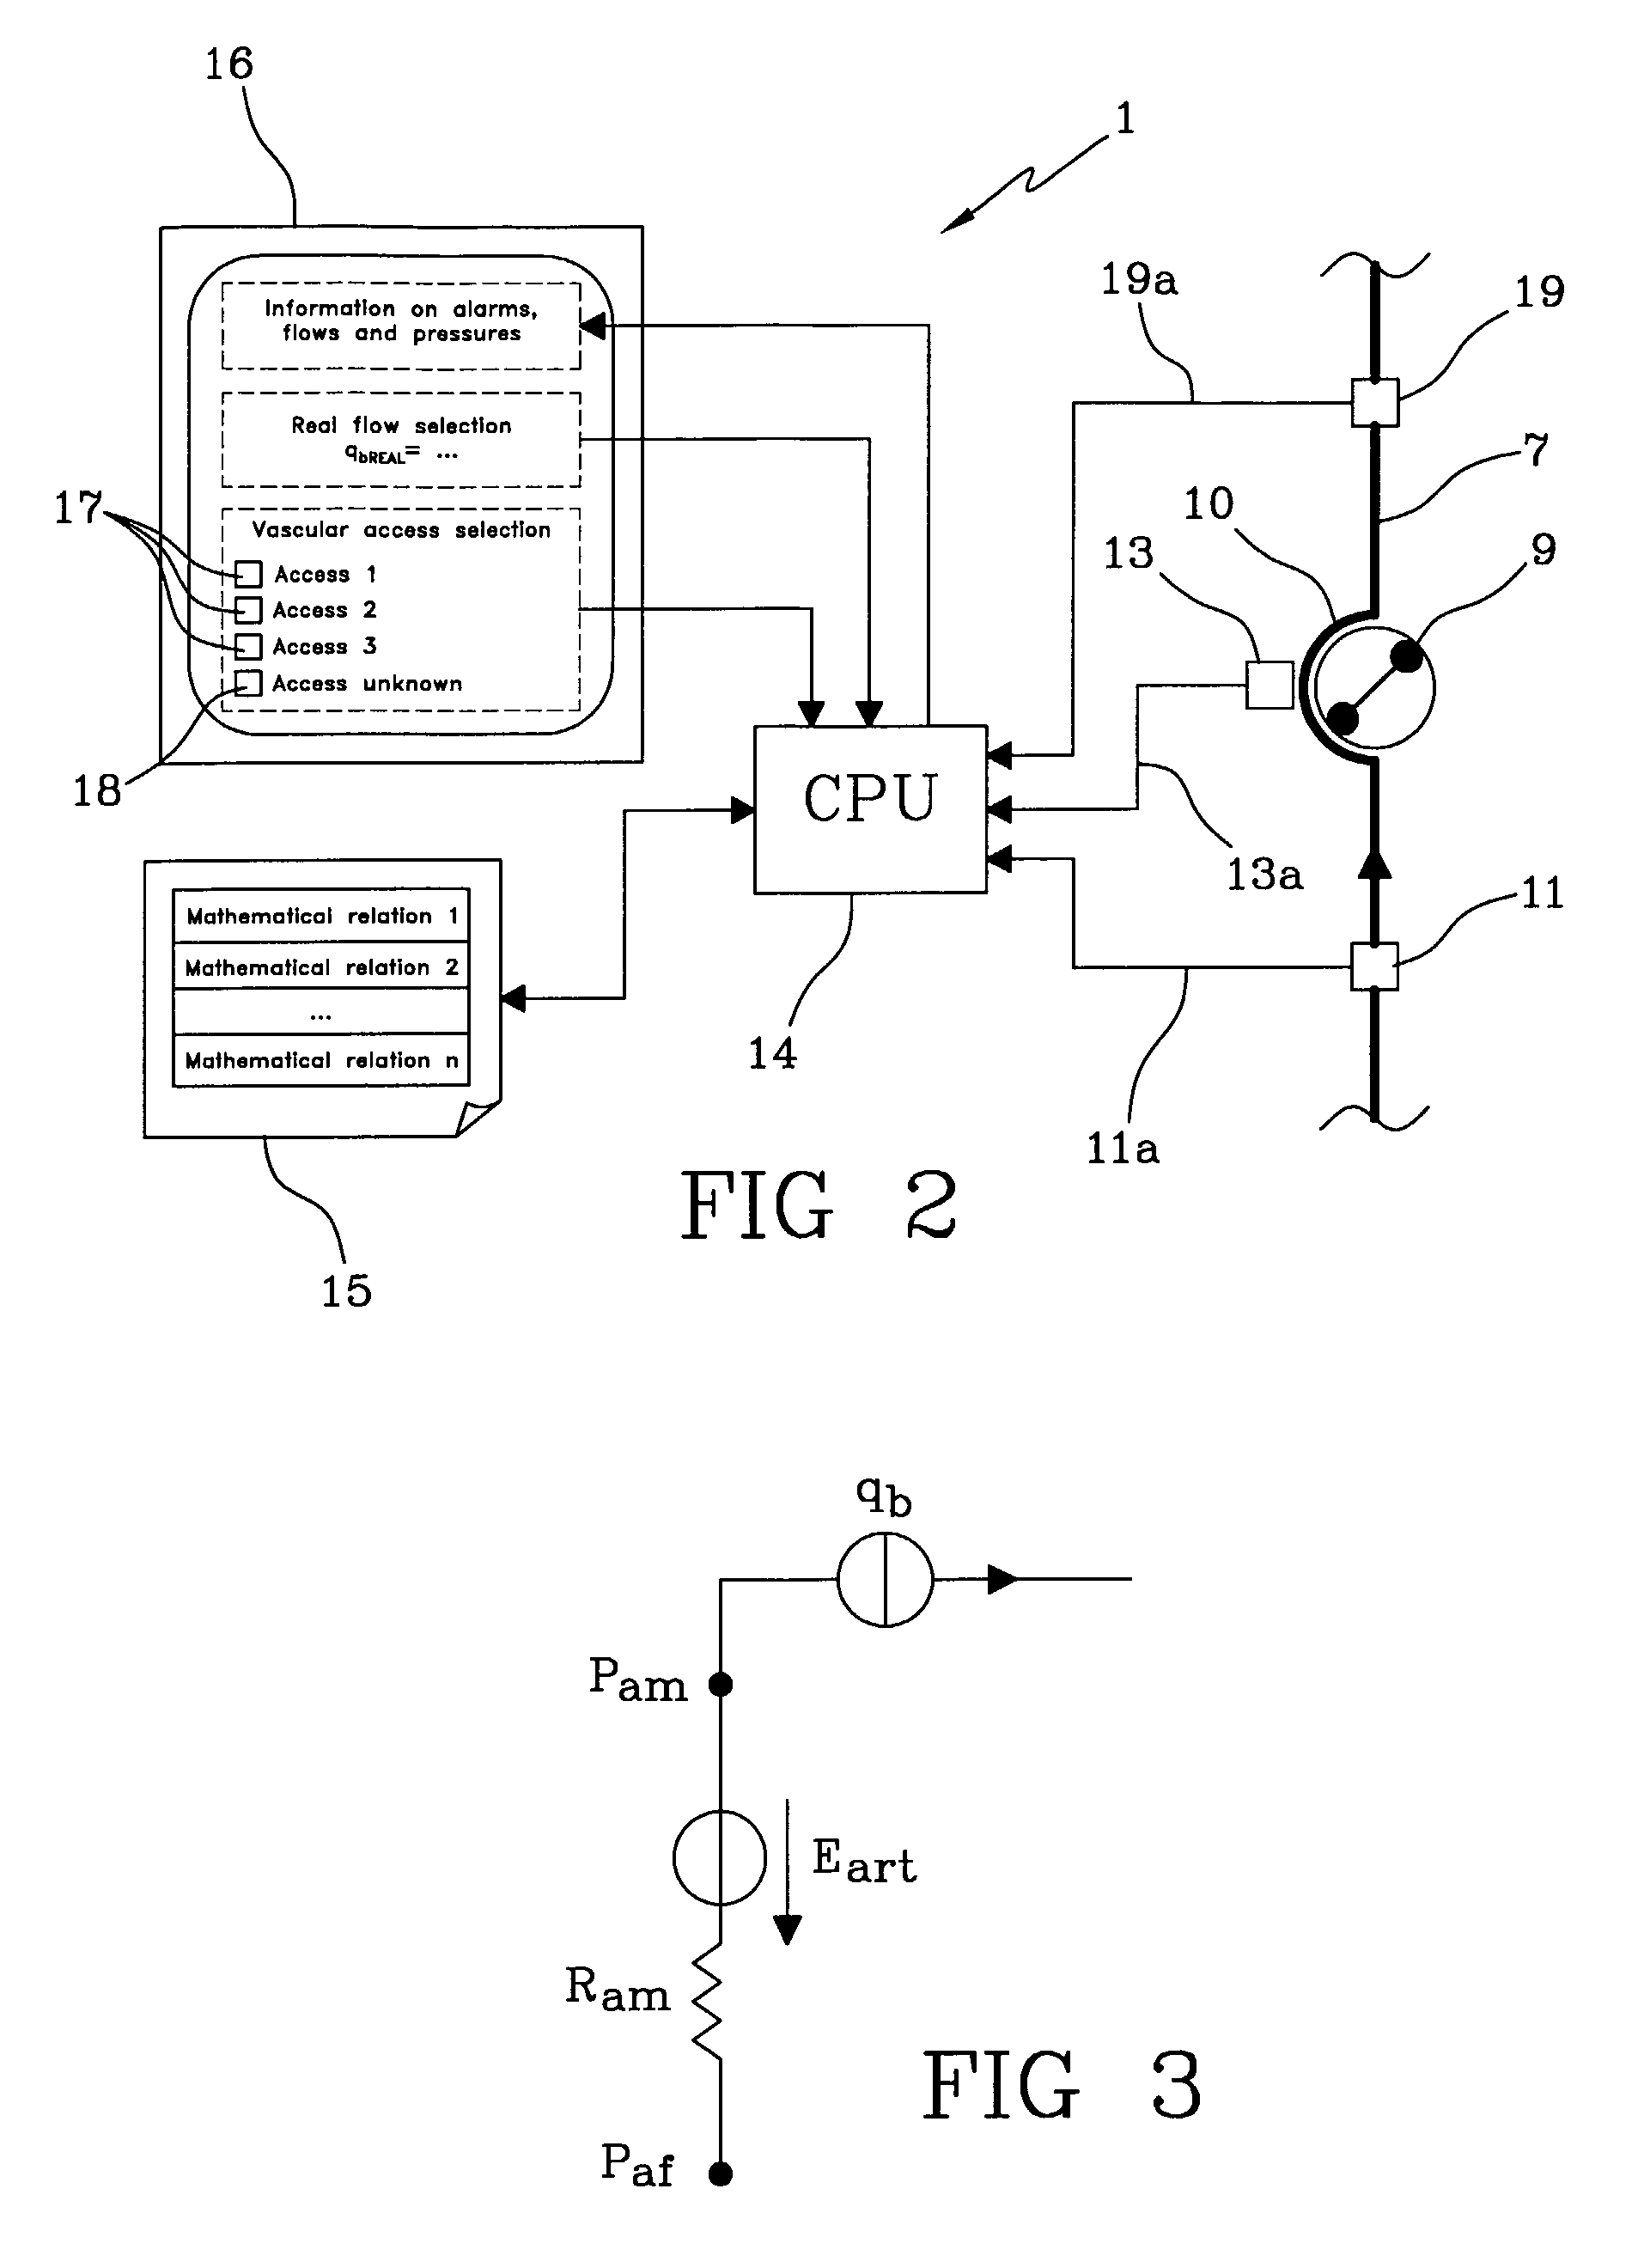 Apparatus for controlling blood flow in an extracorporeal circuit